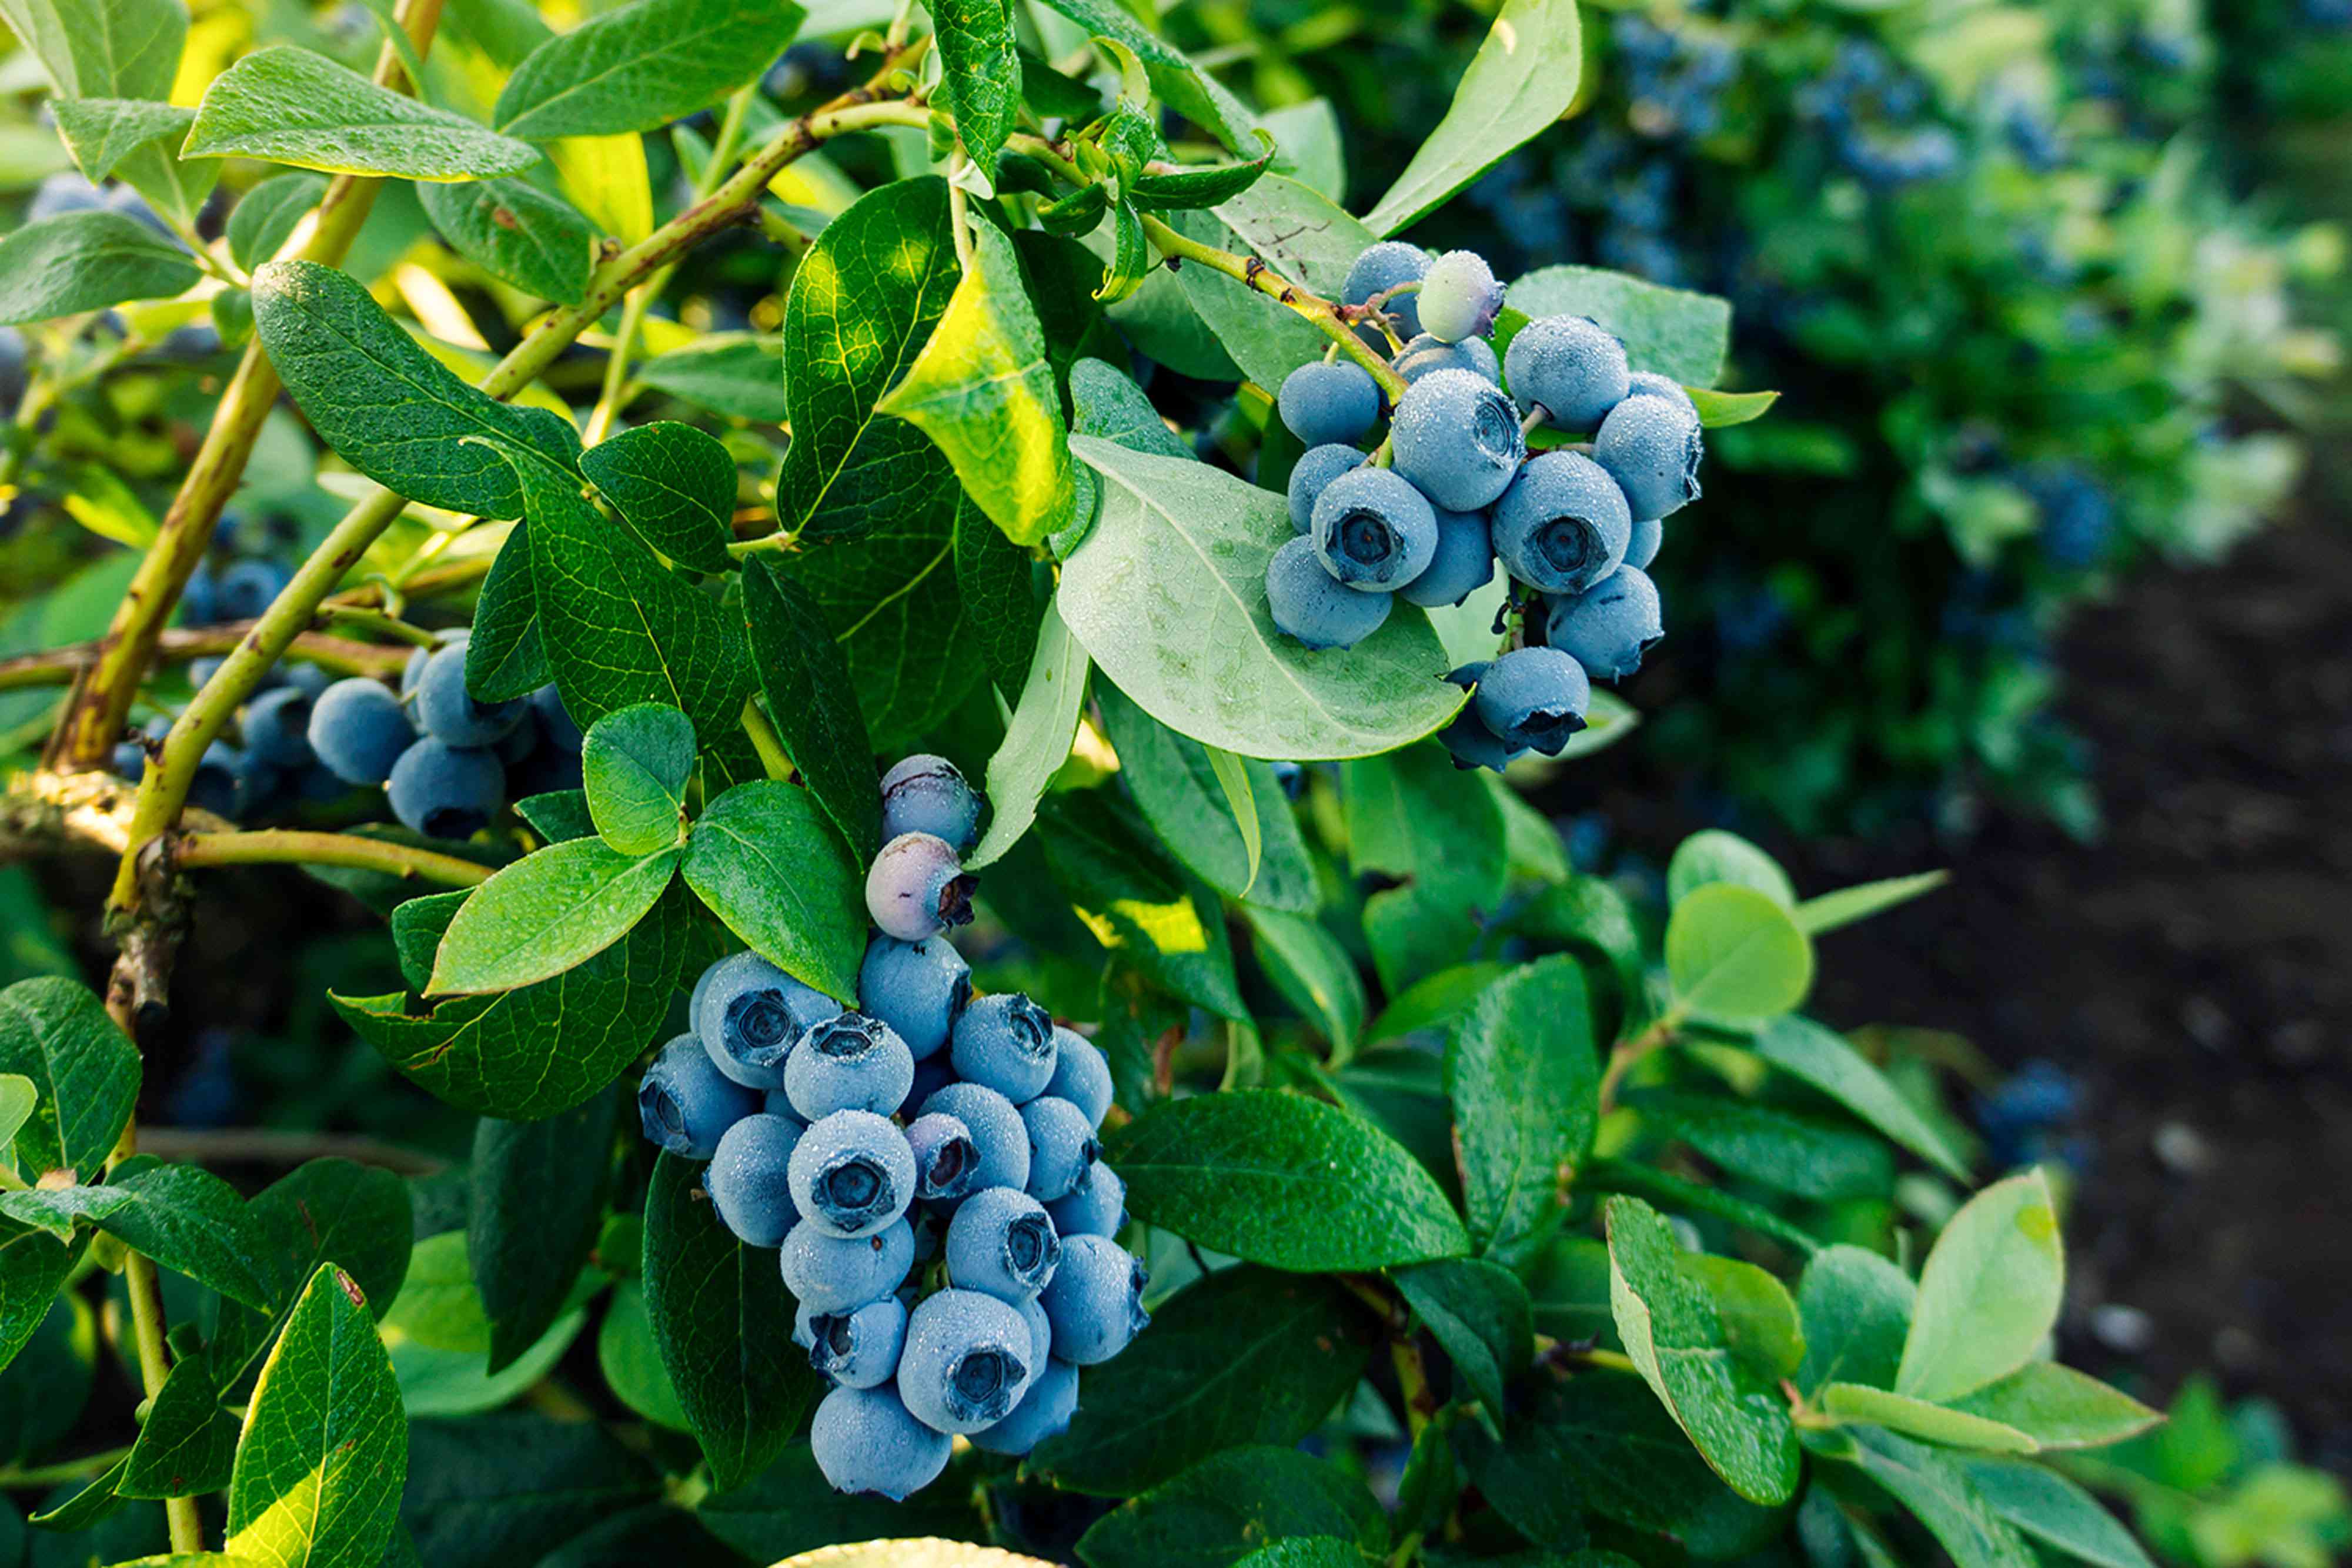 12 Companion Plants to Grow Next to Blueberries for a More Bountiful Harvest